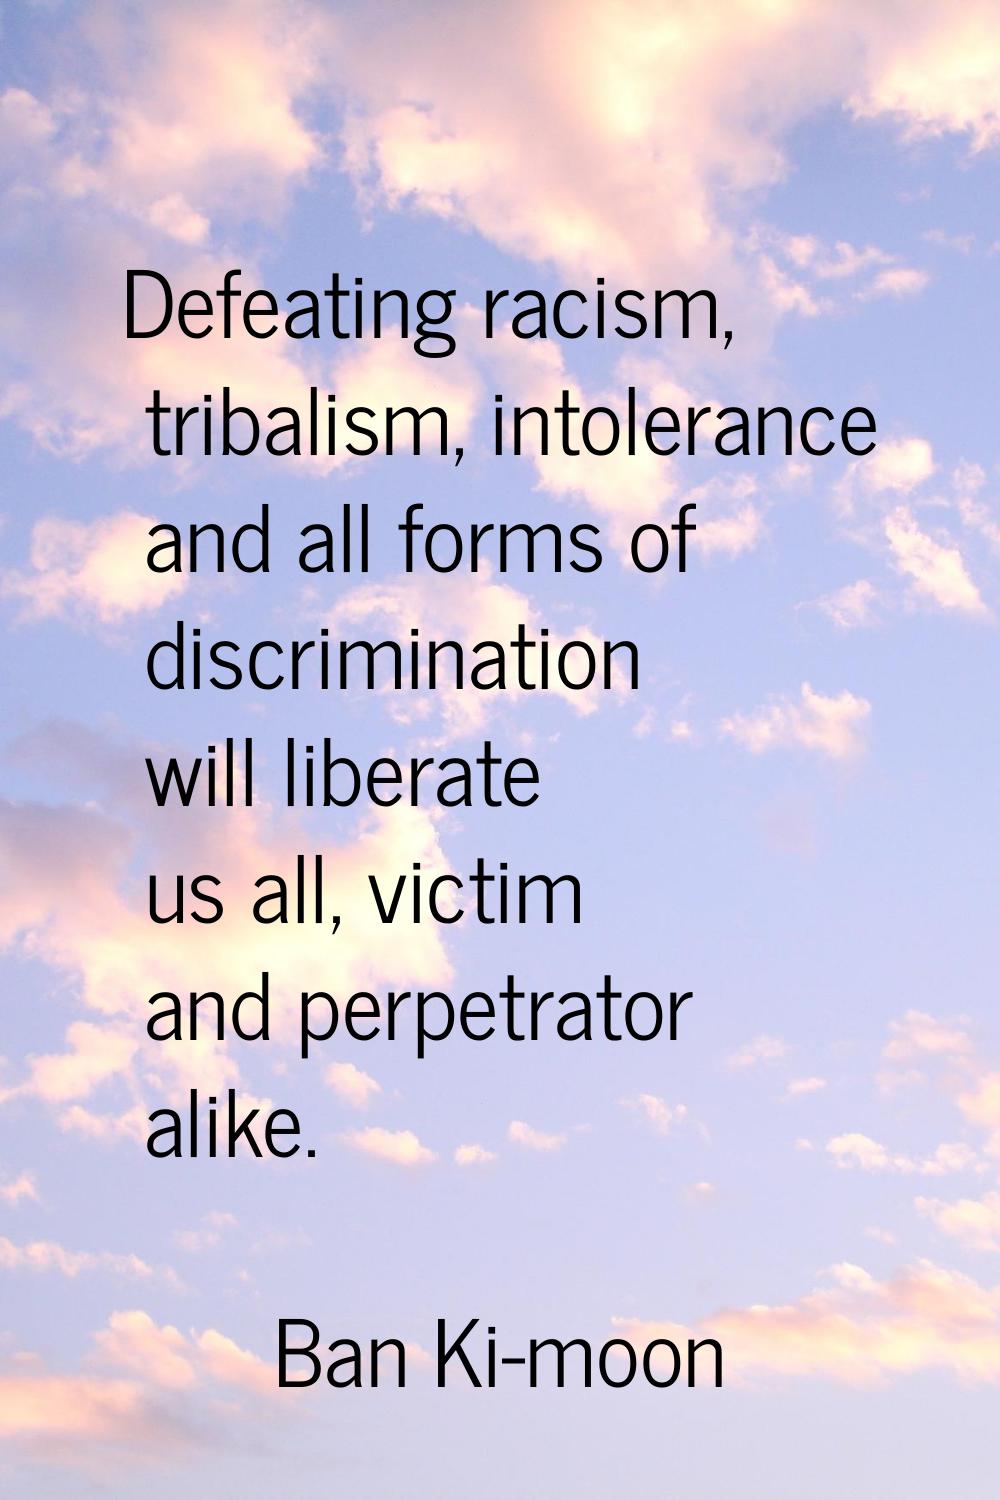 Defeating racism, tribalism, intolerance and all forms of discrimination will liberate us all, vict